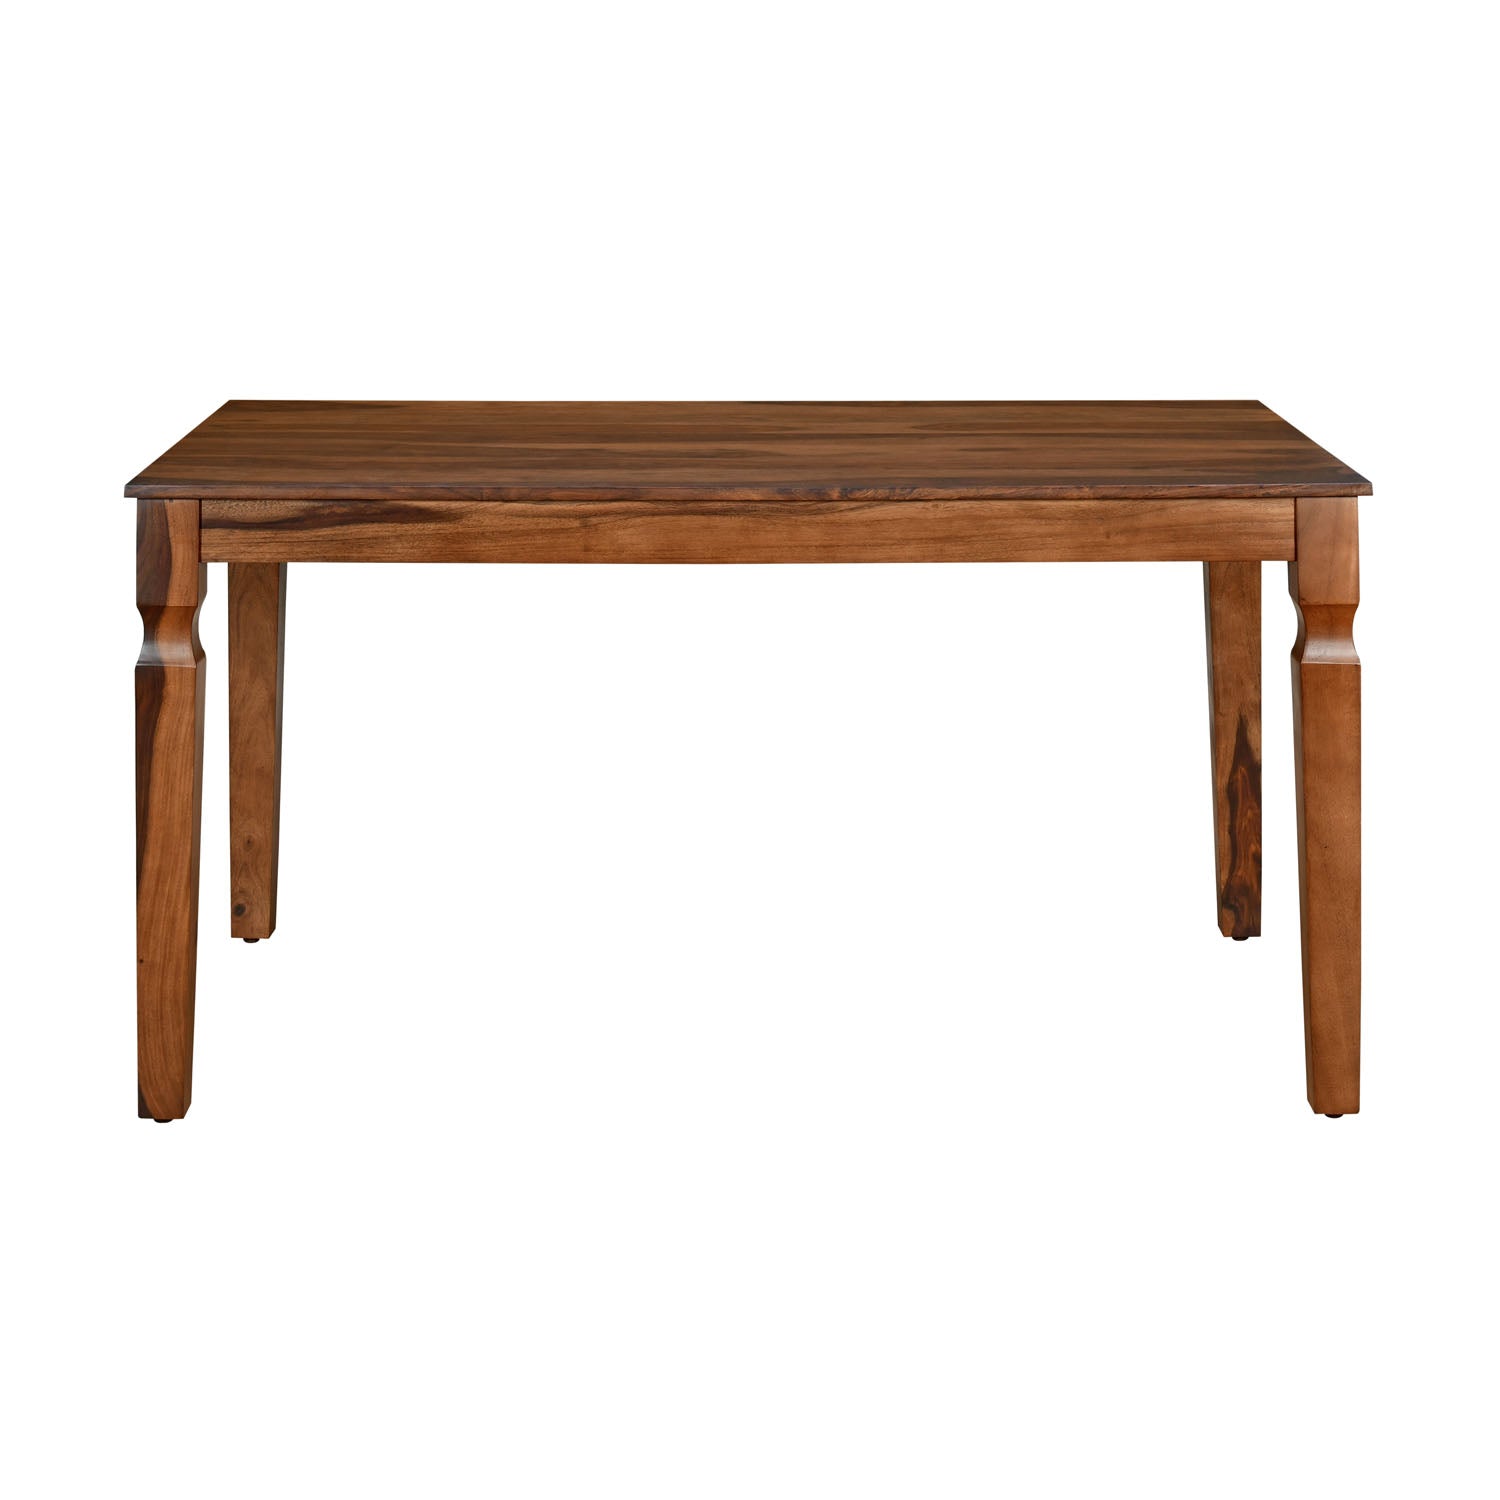 Europa Solid Wood 6 Seater Dining Table (Walnut)